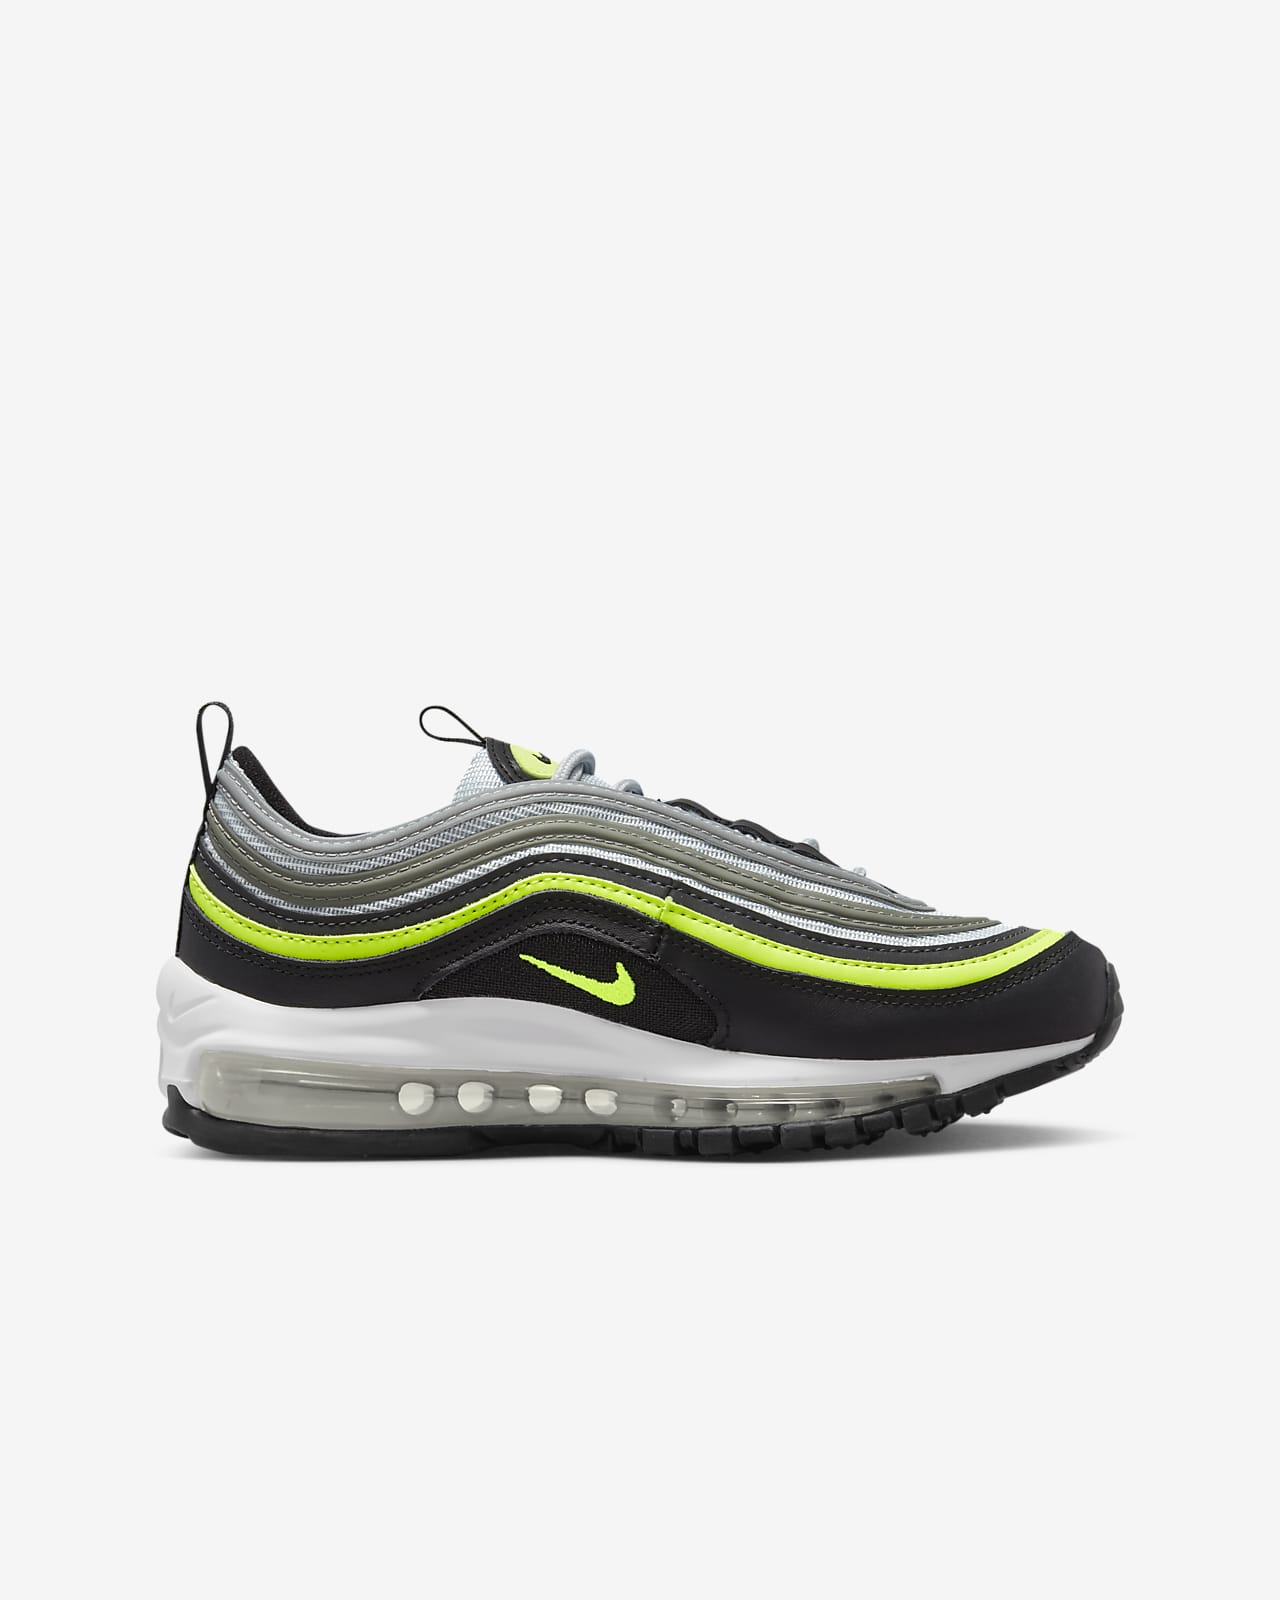 Forgænger telex Nægte Nike Air Max 97 Older Kids' Shoes. Nike ID